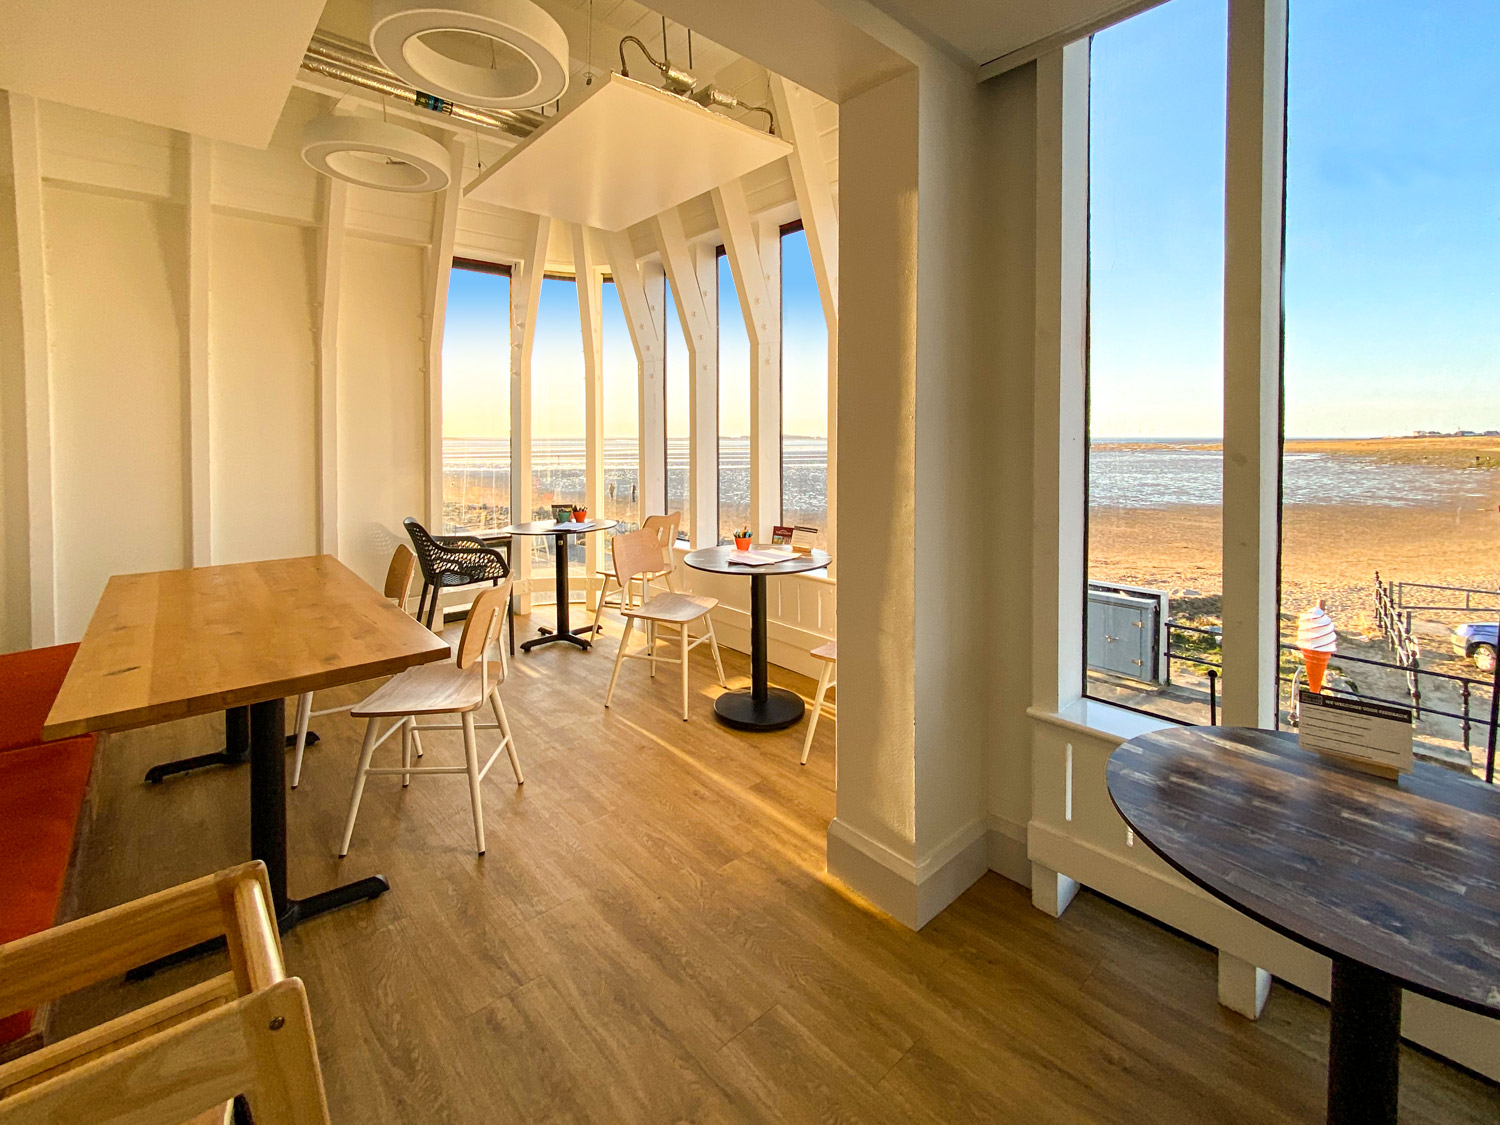 The Sail Loft Coastal Kitchen West Kirby inside dining looking out over the River Dee